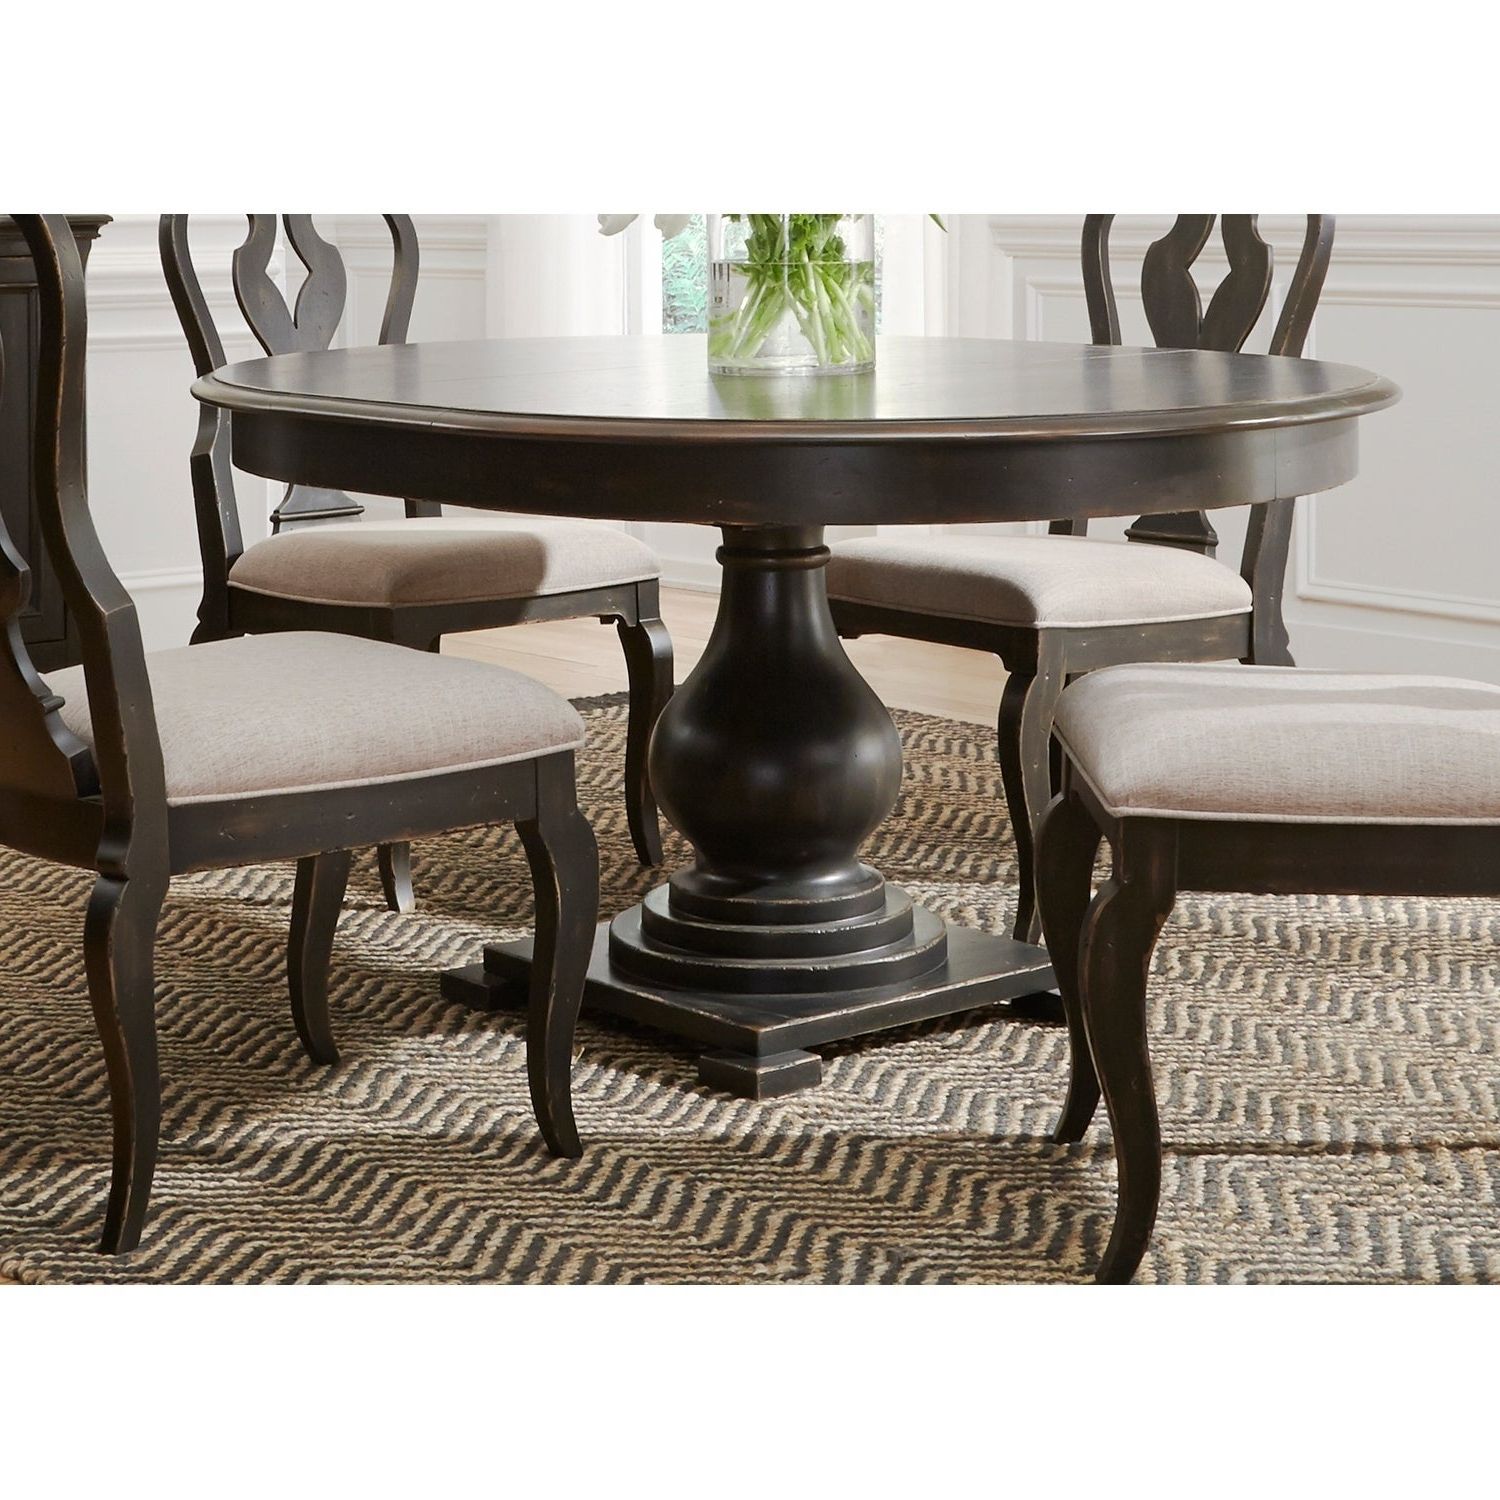 2017 Chesapeake Wire Brushed Antique Black 48x60 Pedestal Dinette Table Regarding Debby Small Space 3 Piece Dining Sets (View 20 of 20)